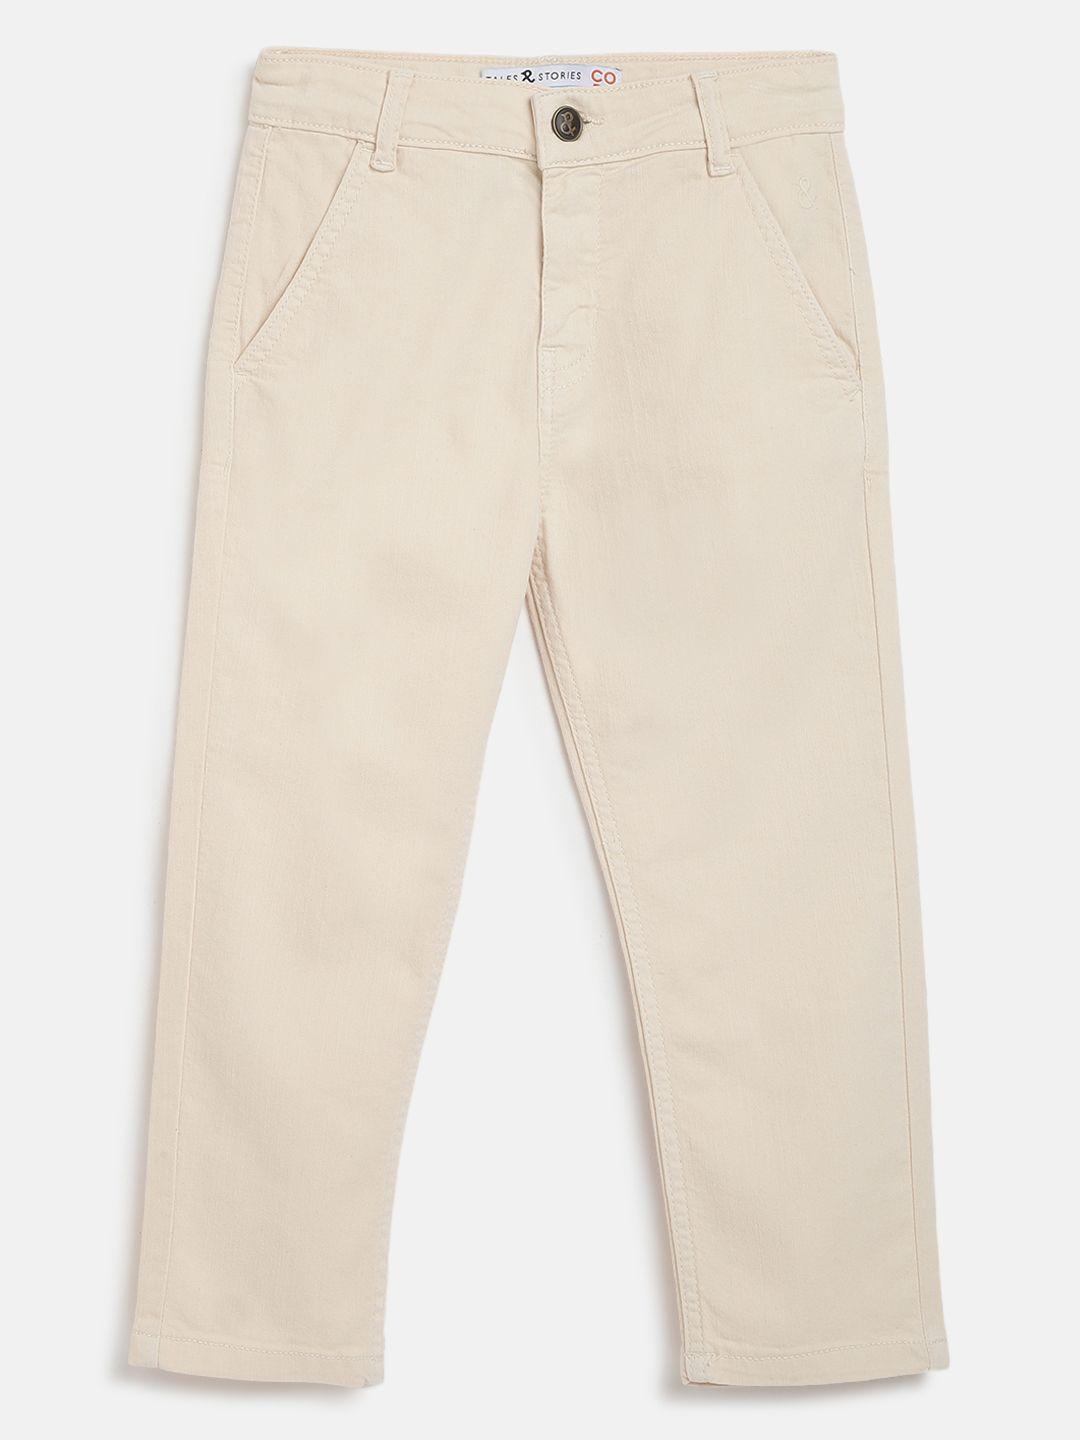 tales-&-stories-boys-mid-rise-slim-fit-chinos